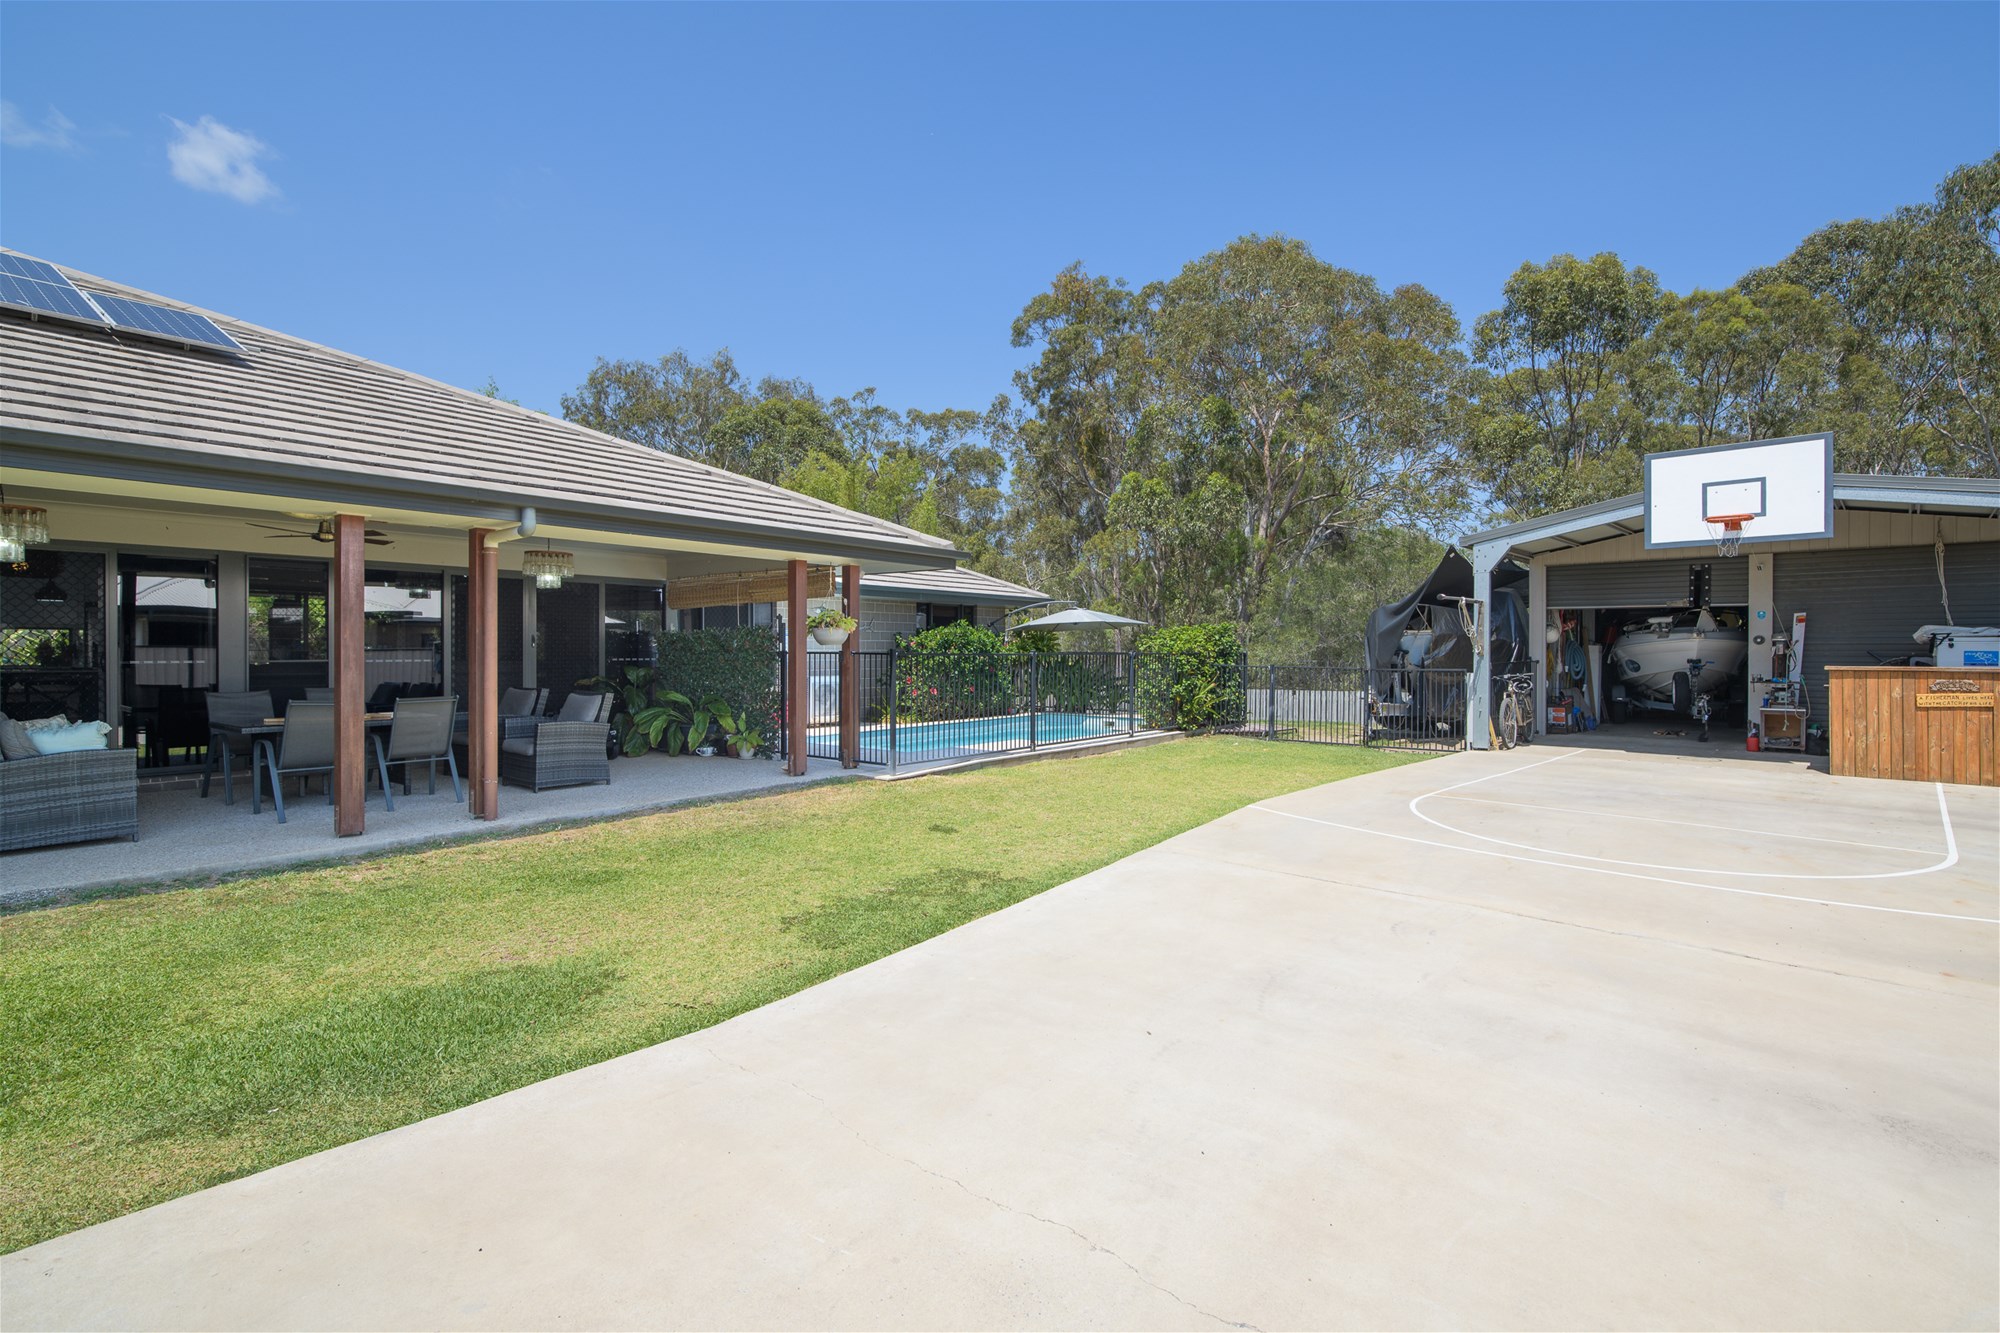 Stunning Family Home On Great Block With Shed, Pool & Solar